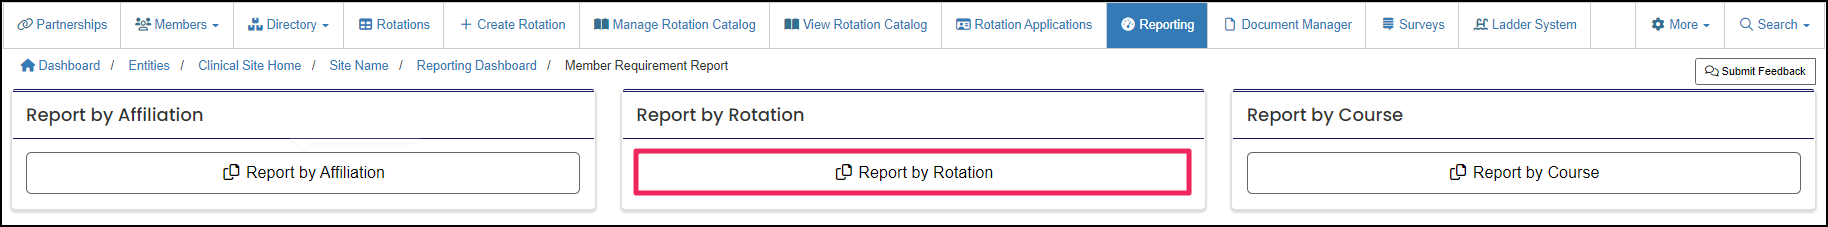 Image shows selecting report by rotation button